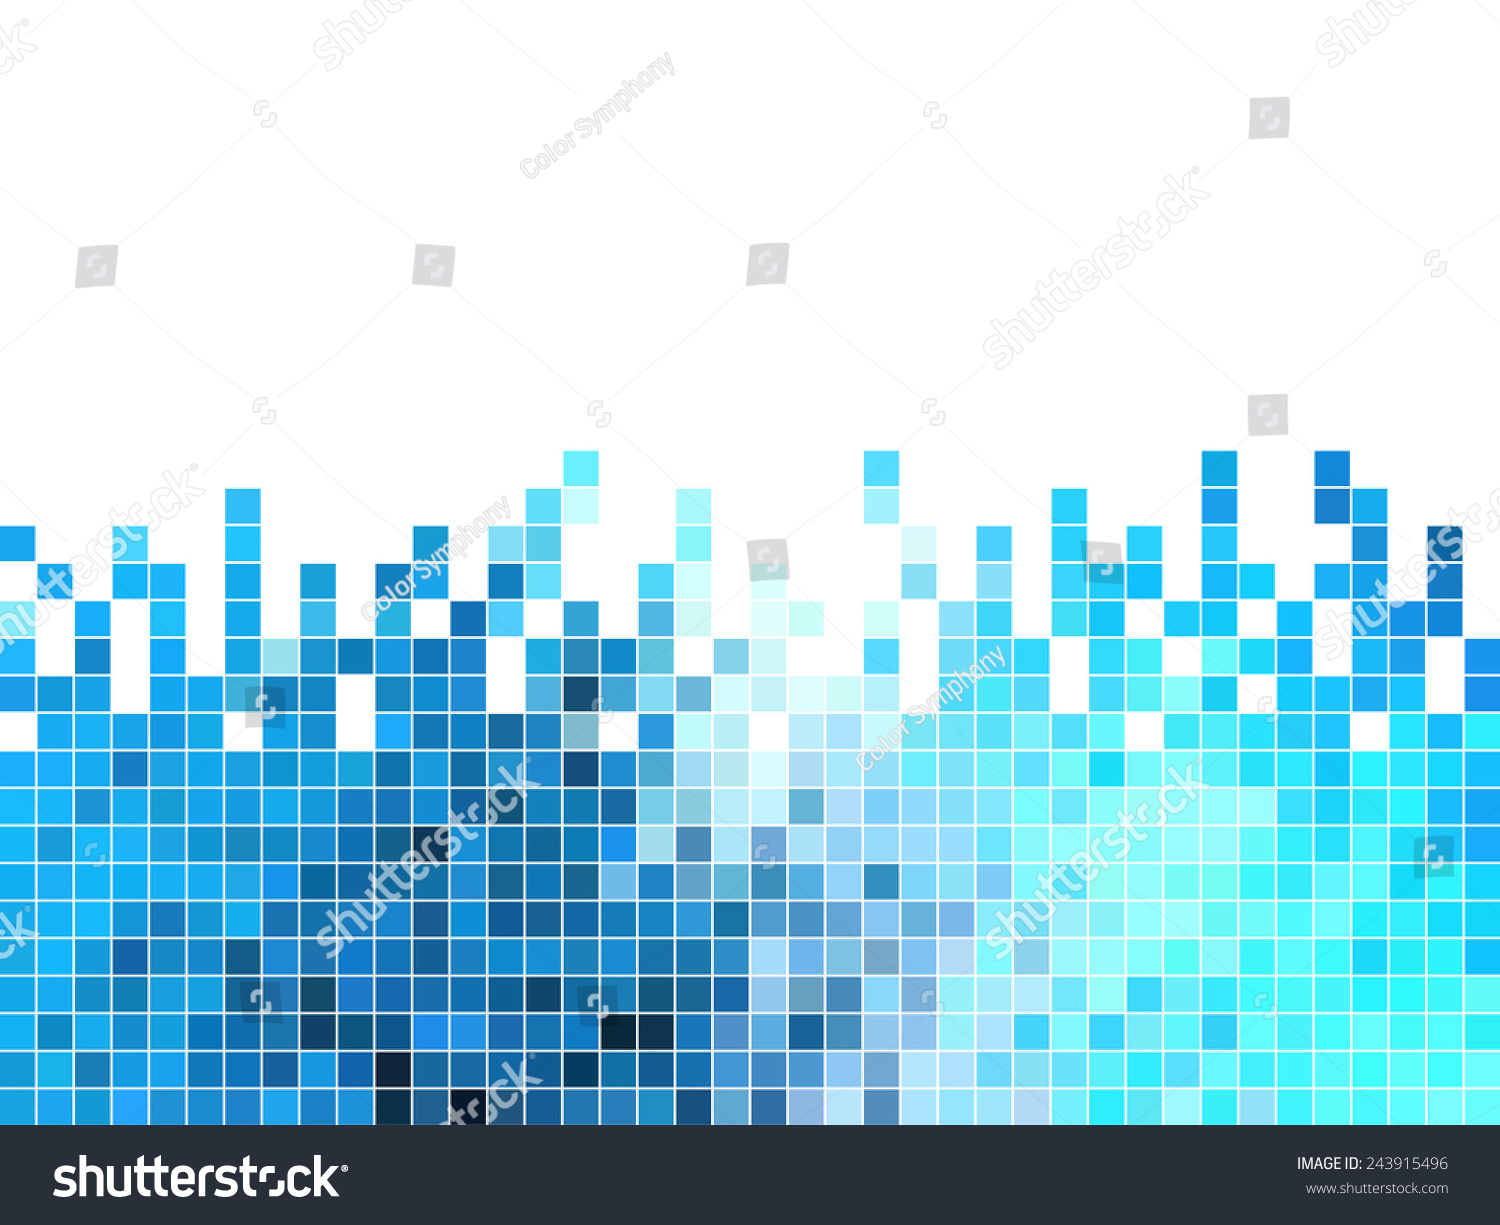 Abstract Square Pixel Mosaic Background Stock Vector 243915496 ...